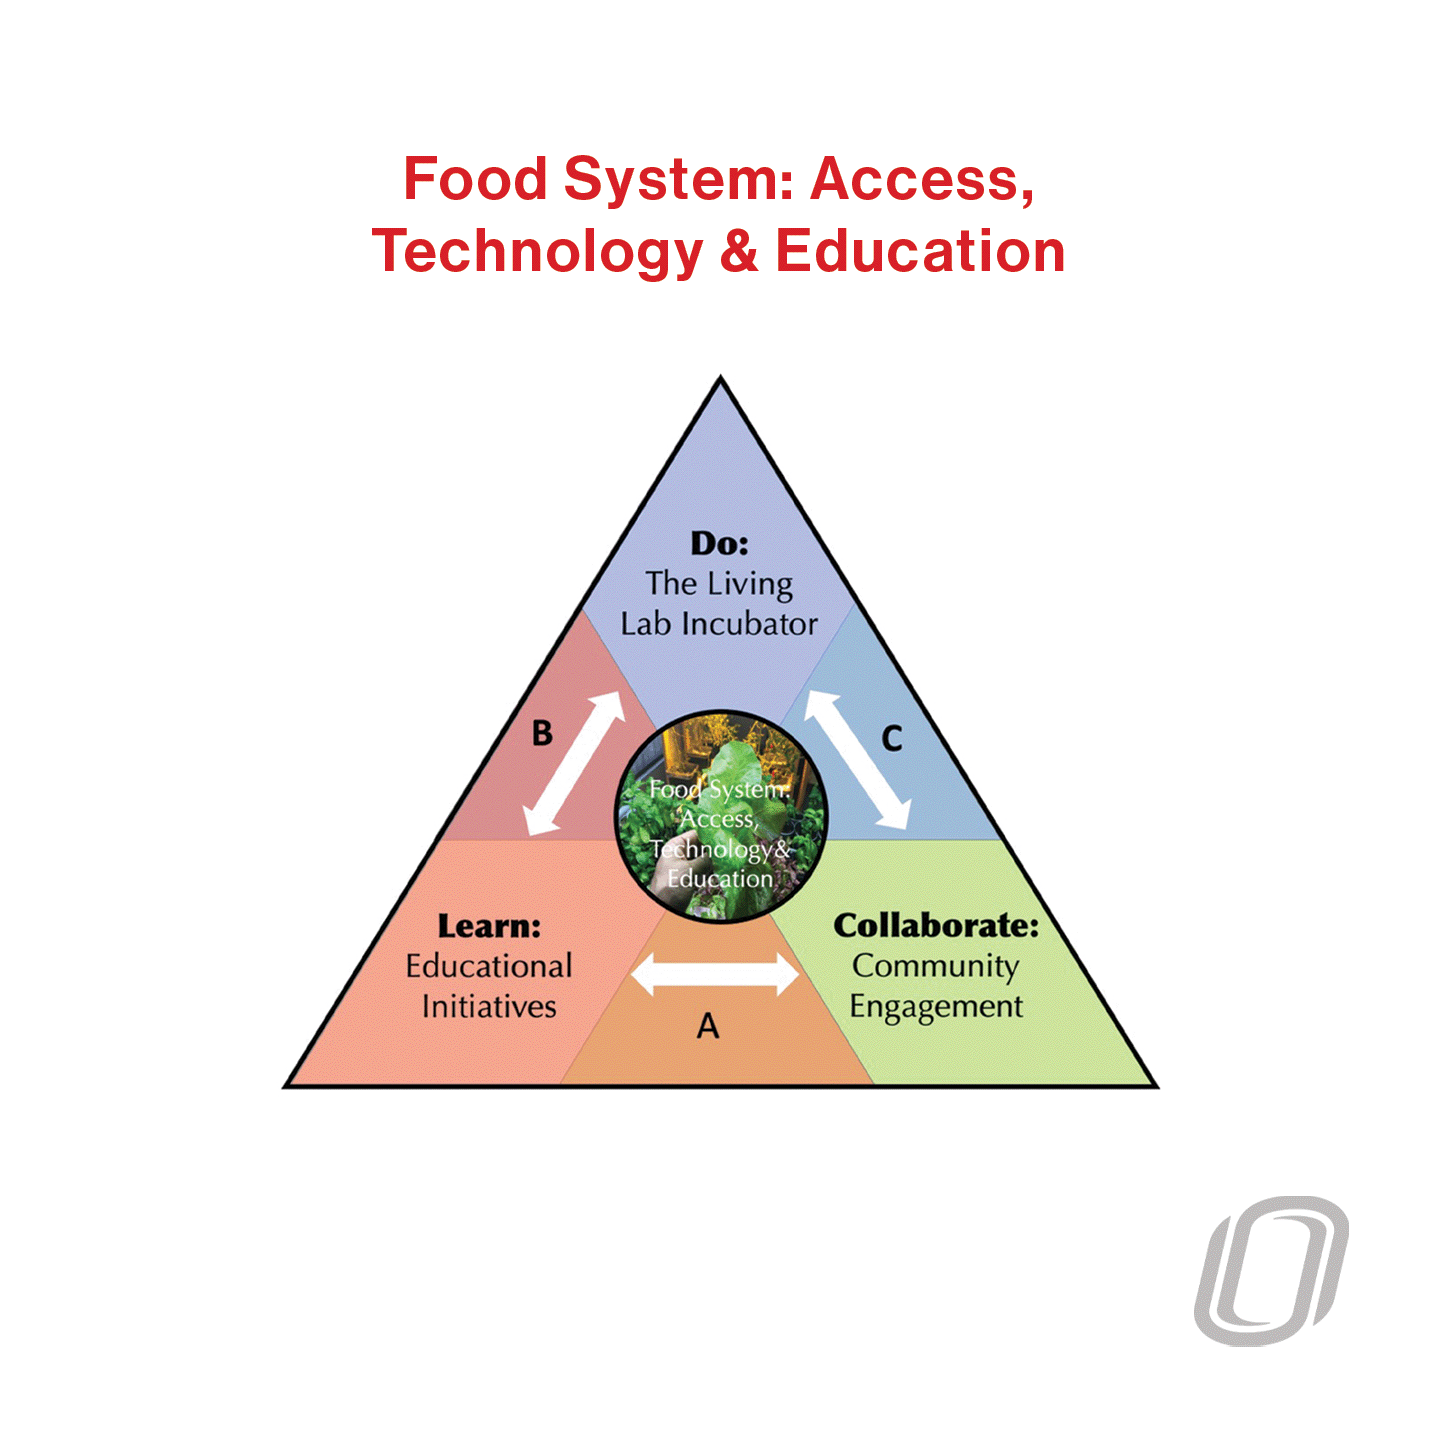 a pyramid diagram that depicts the food system using access, technology and education